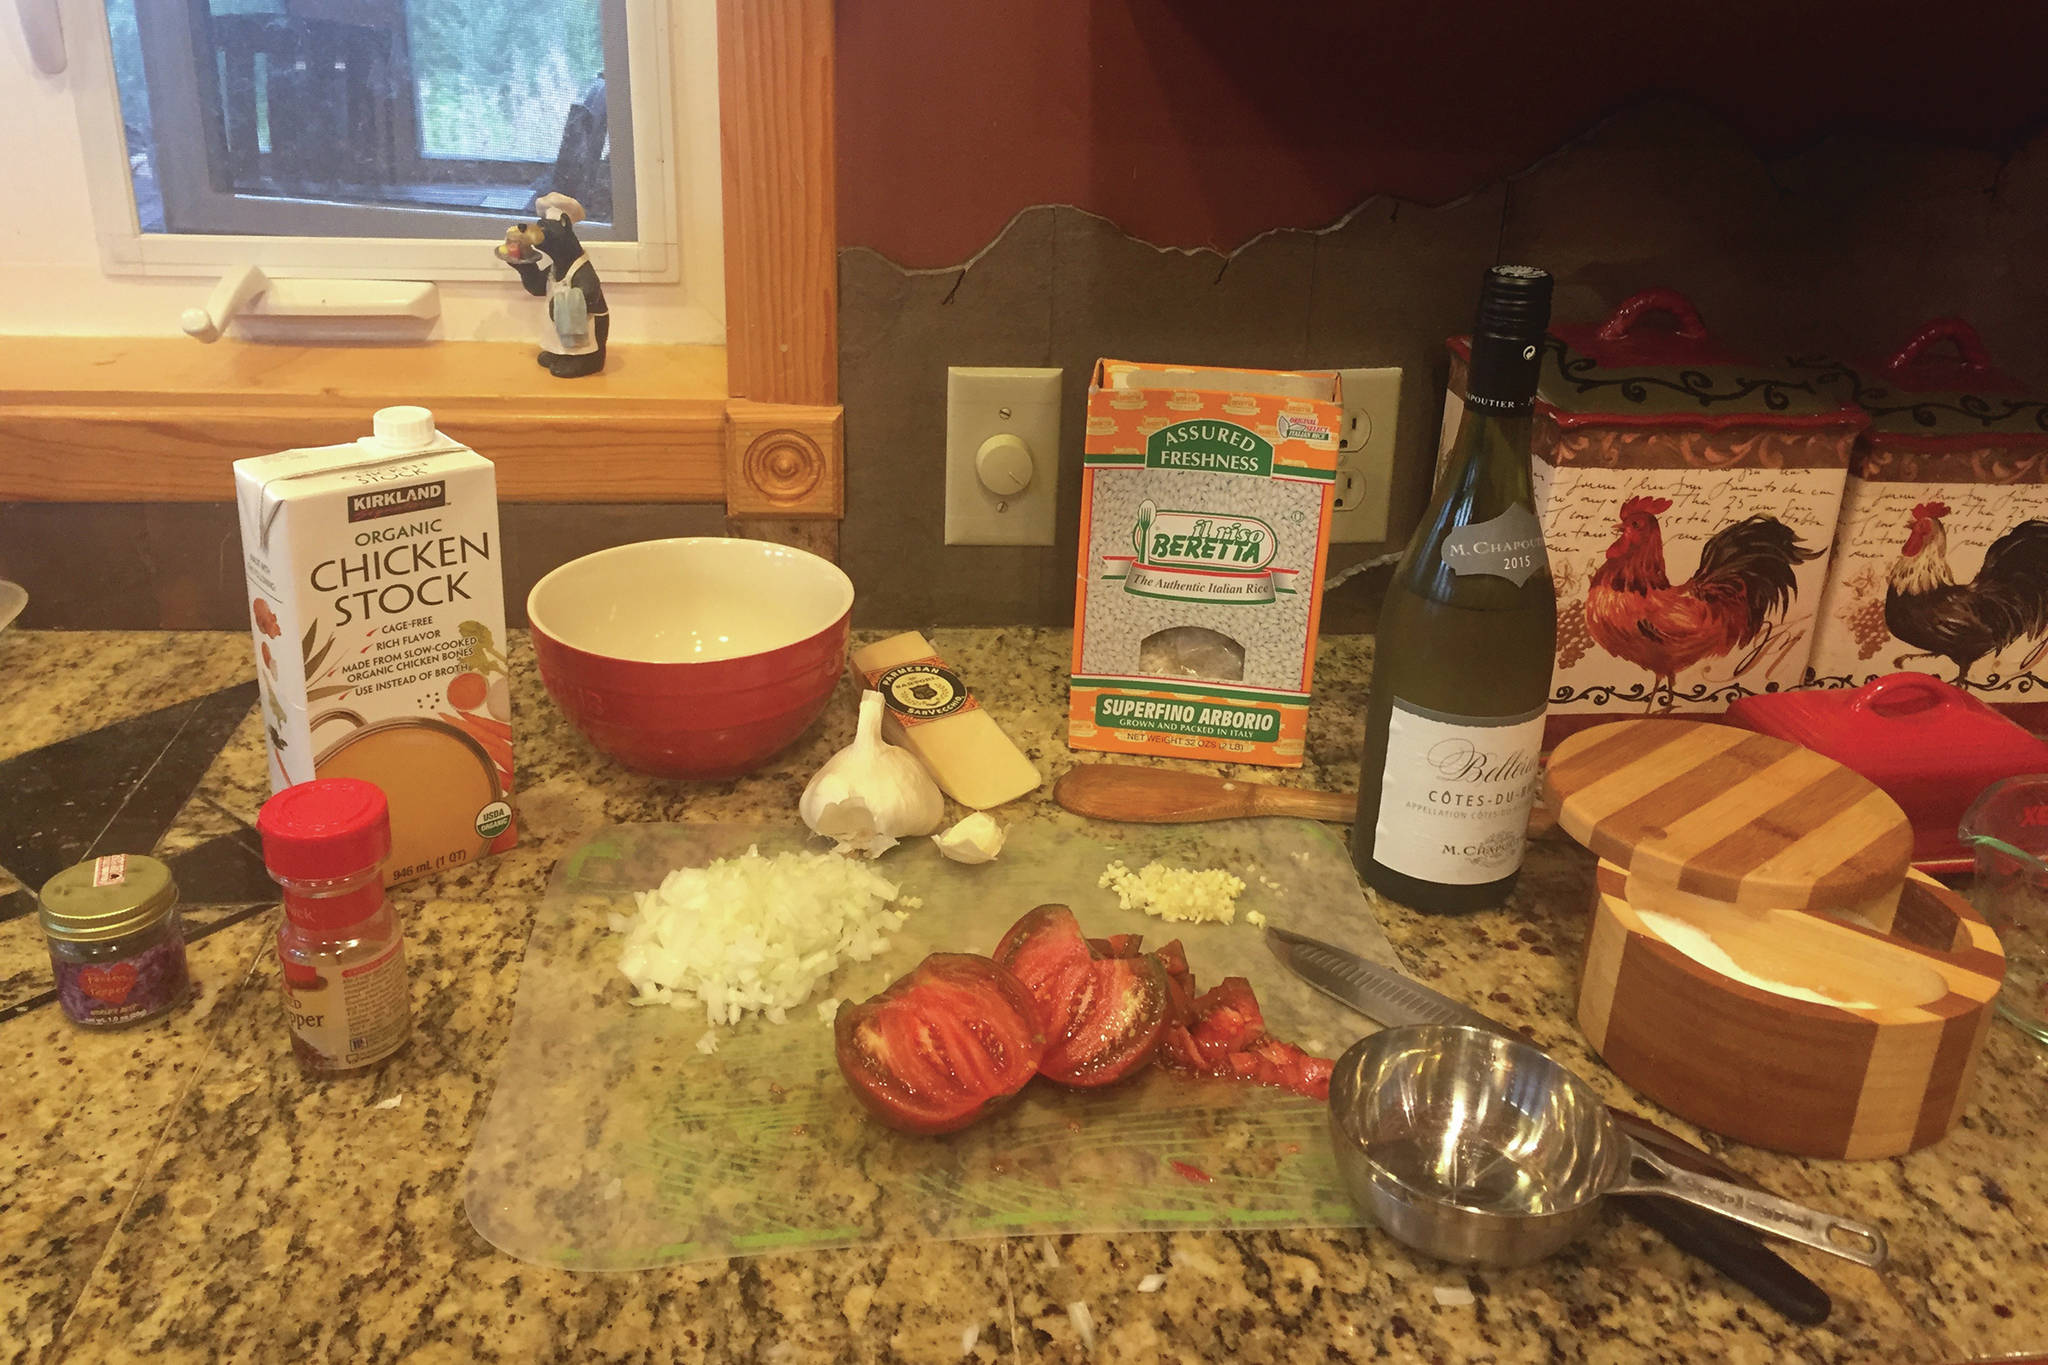 Tomato Risotto takes time to make, but the preparation can be therapeutic. The ingredients include fresh tomatoes grown in a Homer high tunnel, as seen here in Teri Robl’s kitchen in this photo taken on Sept. 17, 2019, in Homer, Alaska. (Photo by Teri Robl)